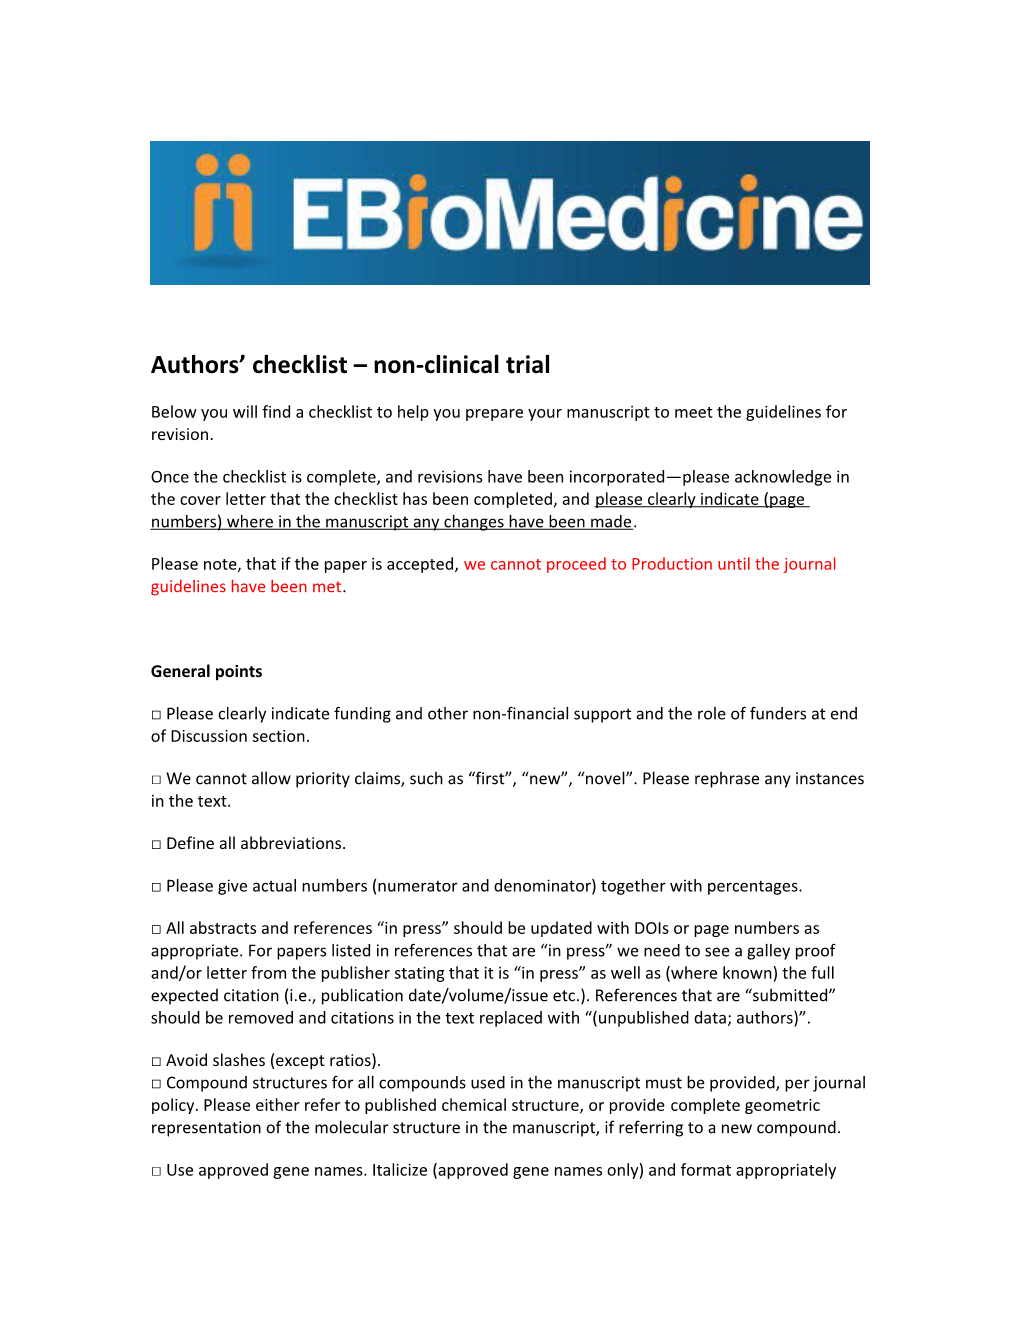 Authors Checklist Non-Clinical Trial